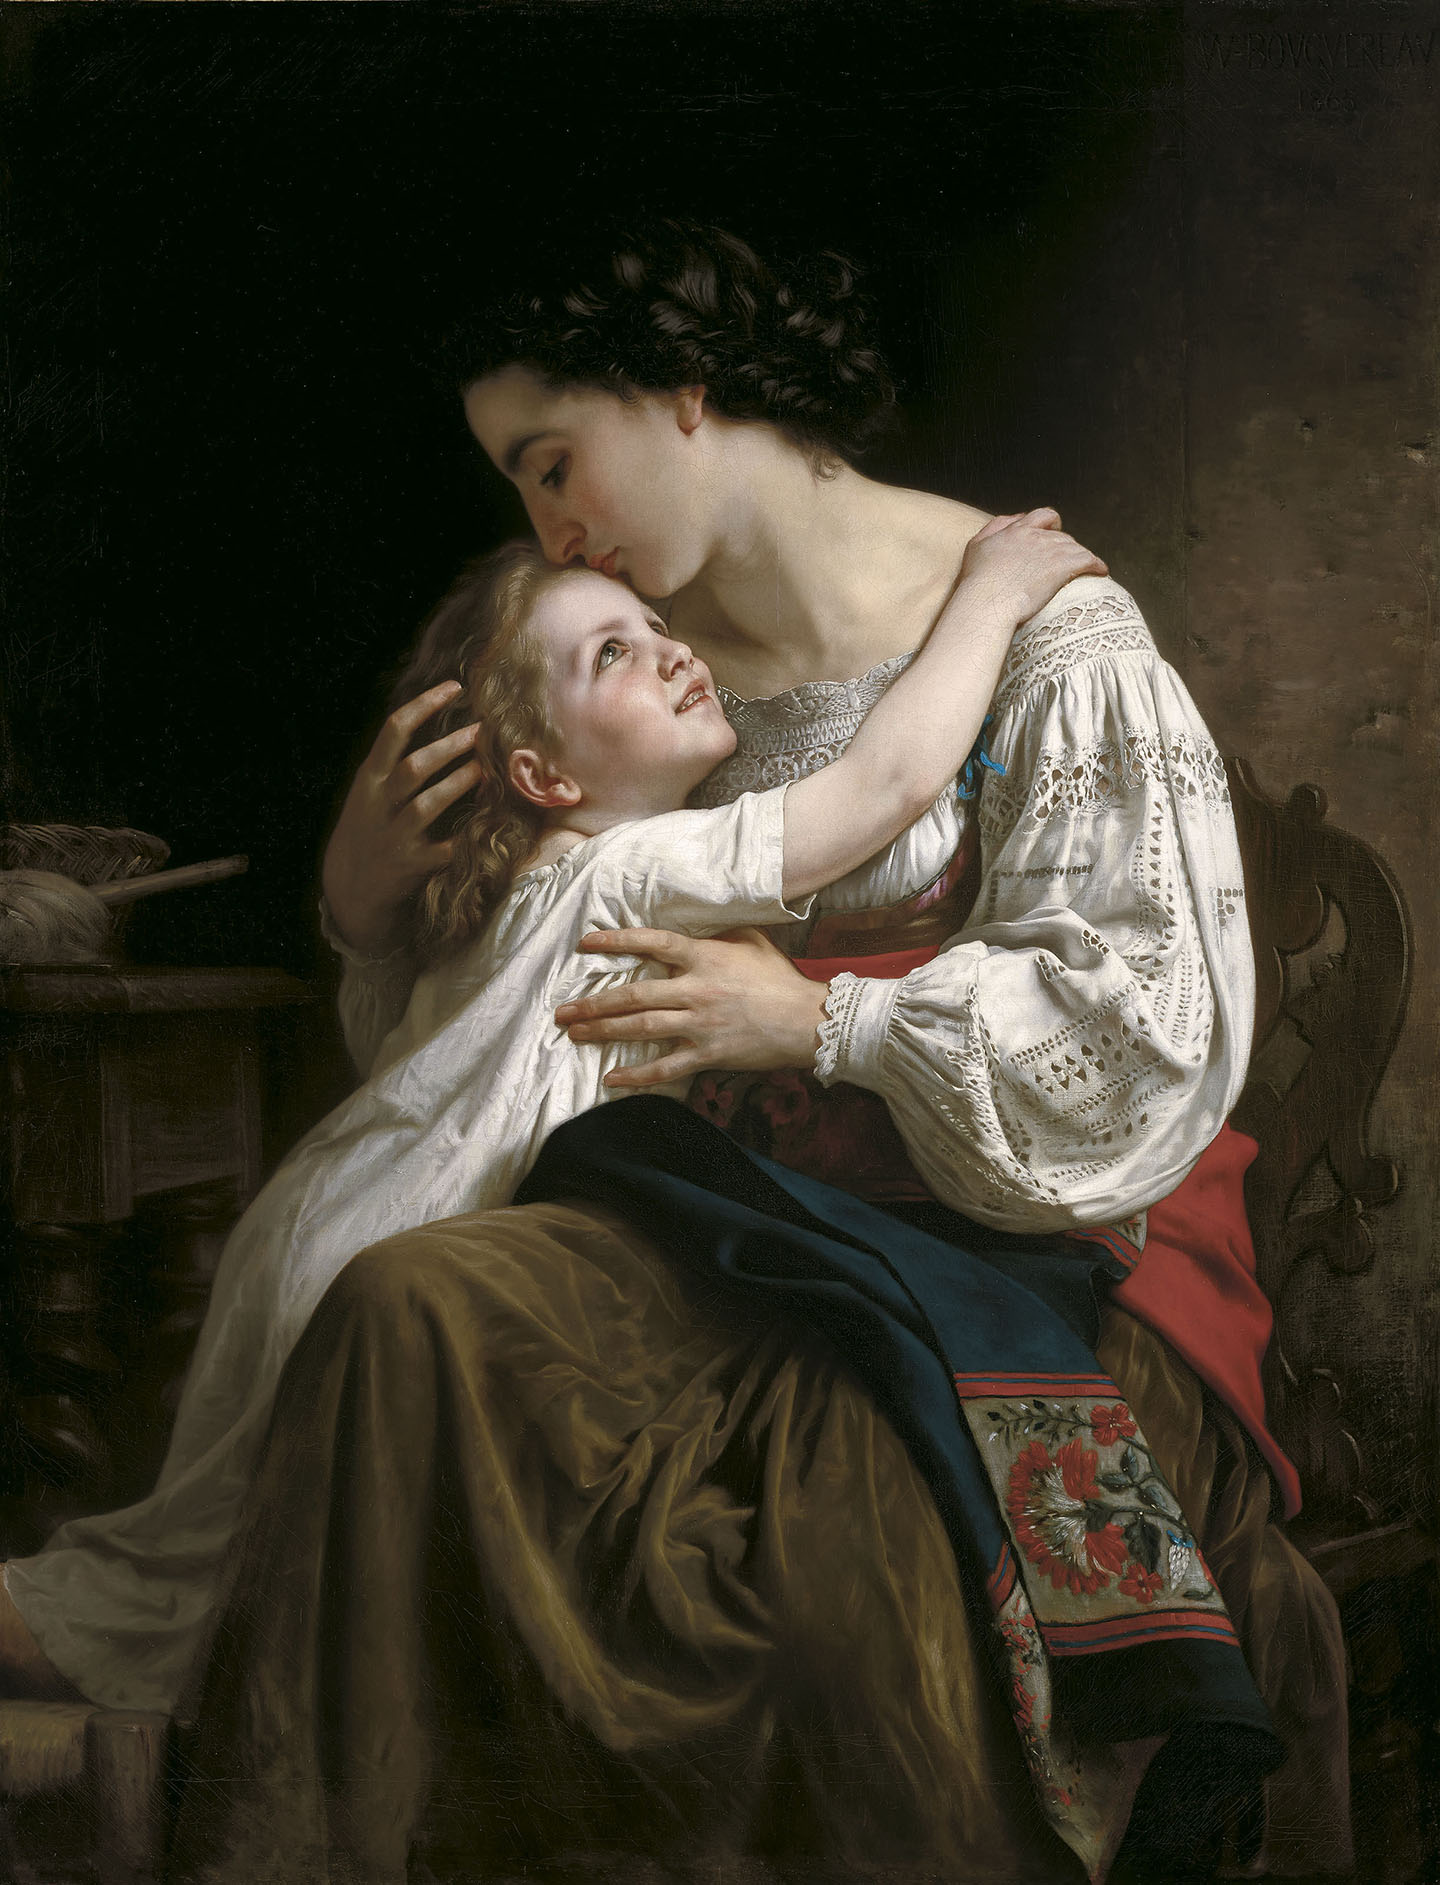 "Le Lever," by William Adolphe Bouguereau